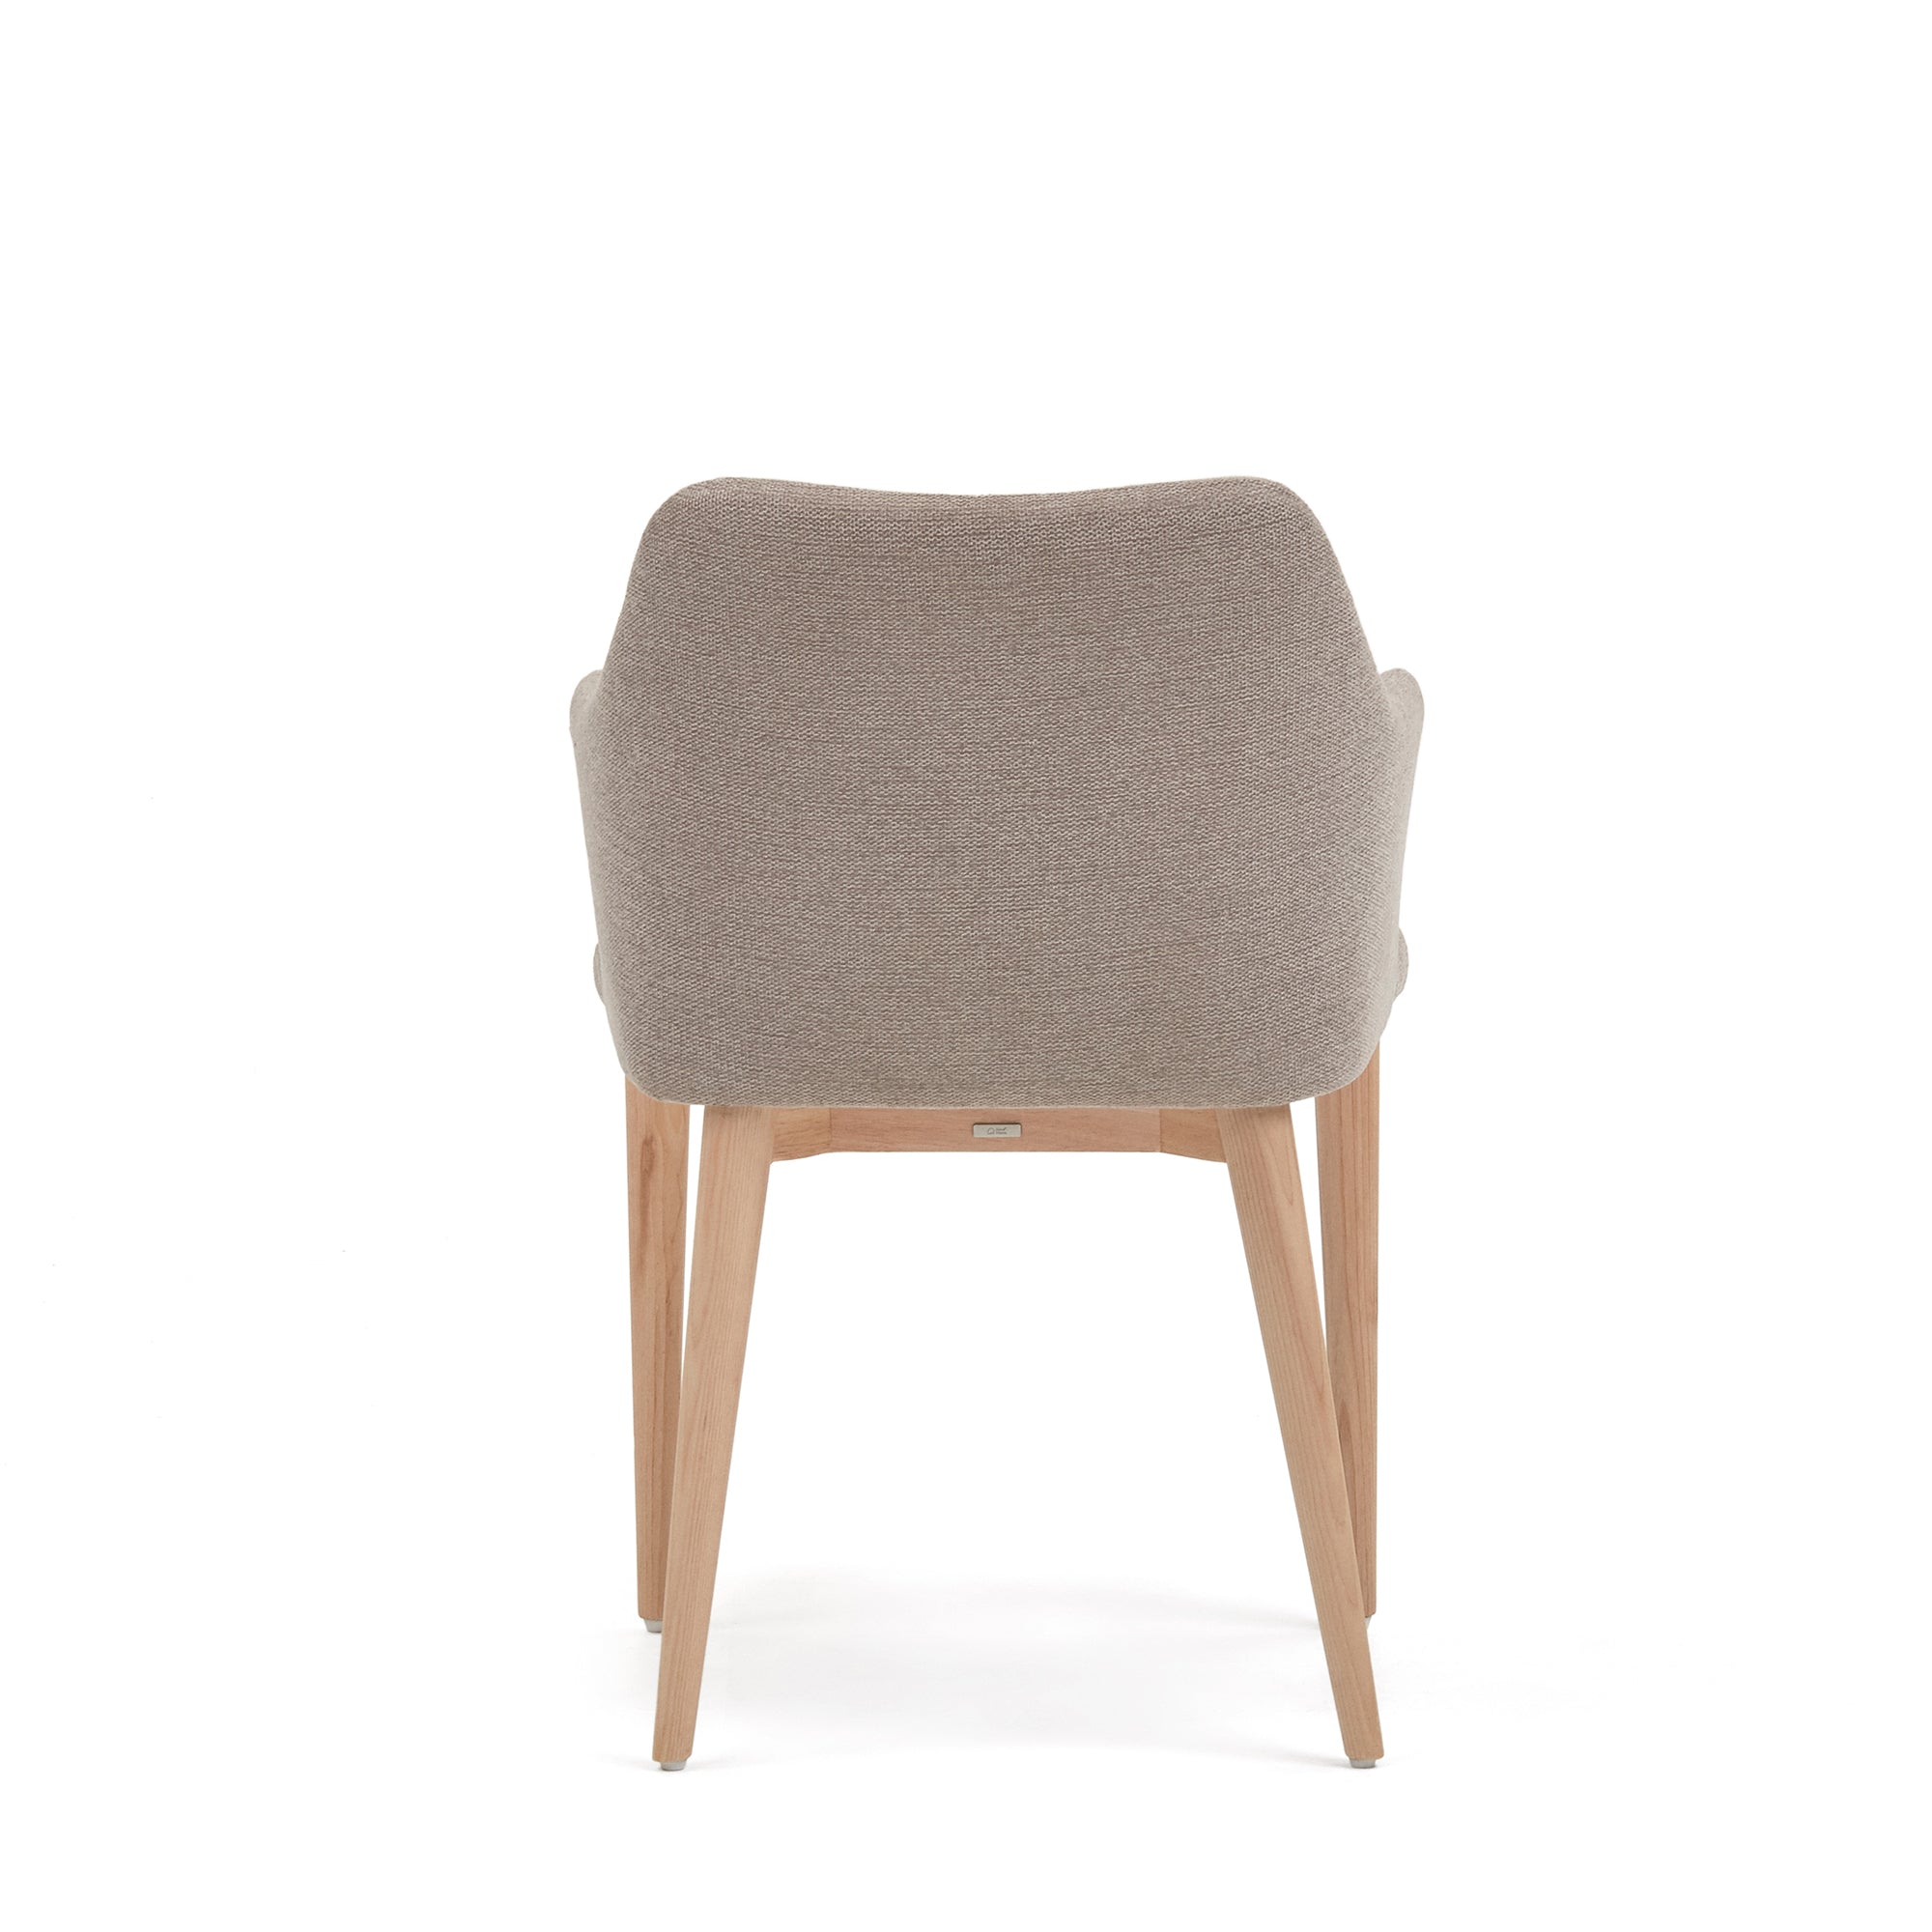 Croft chair in brown chenille with solid ash wood legs